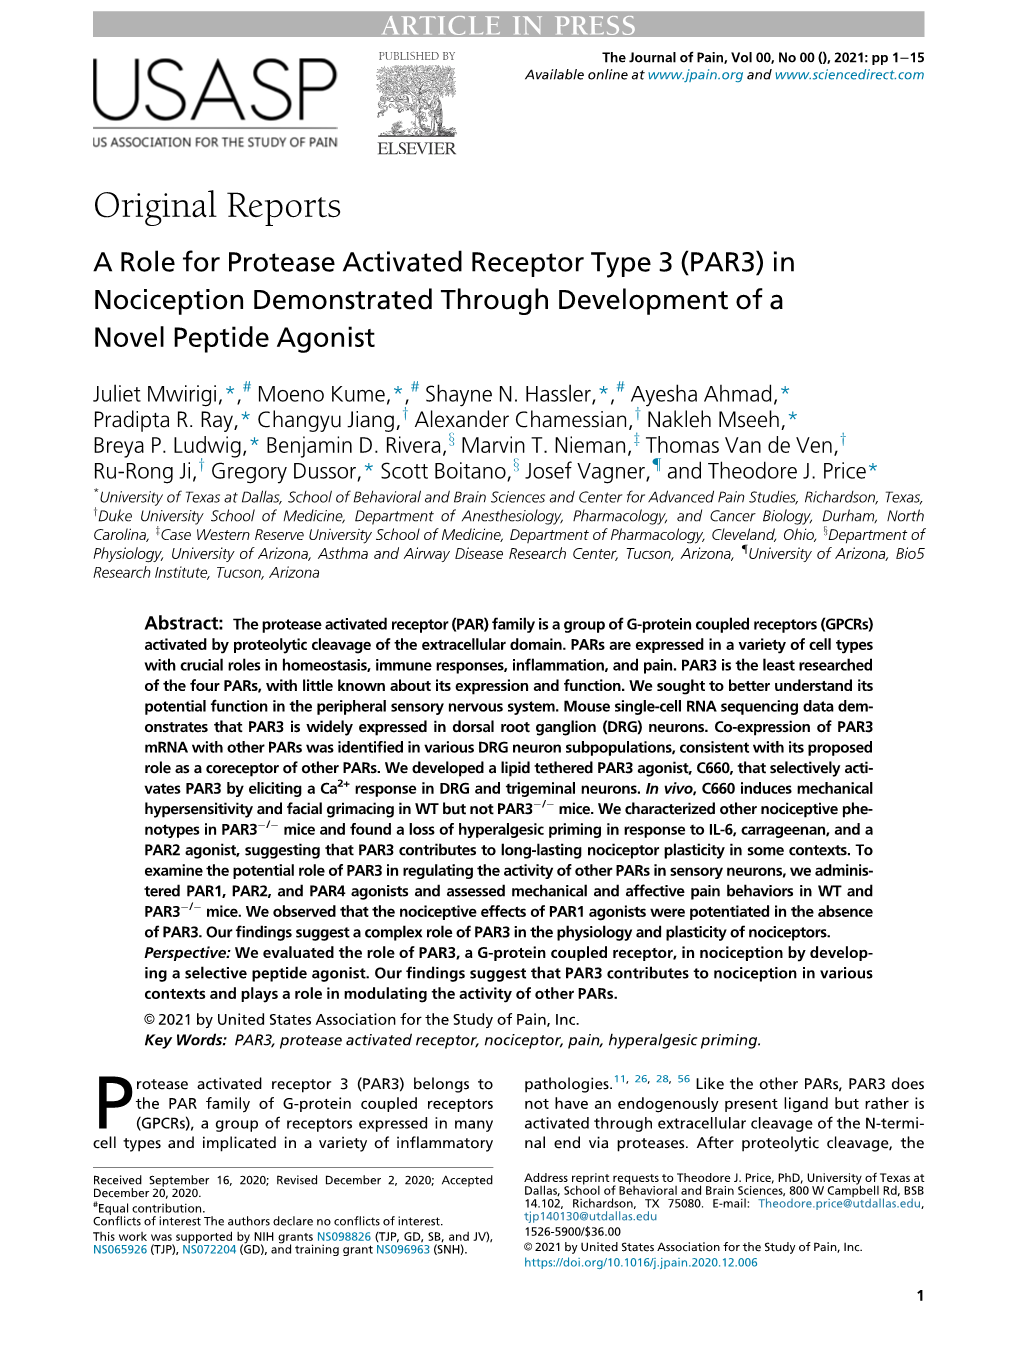 A Role for Protease Activated Receptor Type 3 (PAR3) in Nociception Demonstrated Through Development of a Novel Peptide Agonist